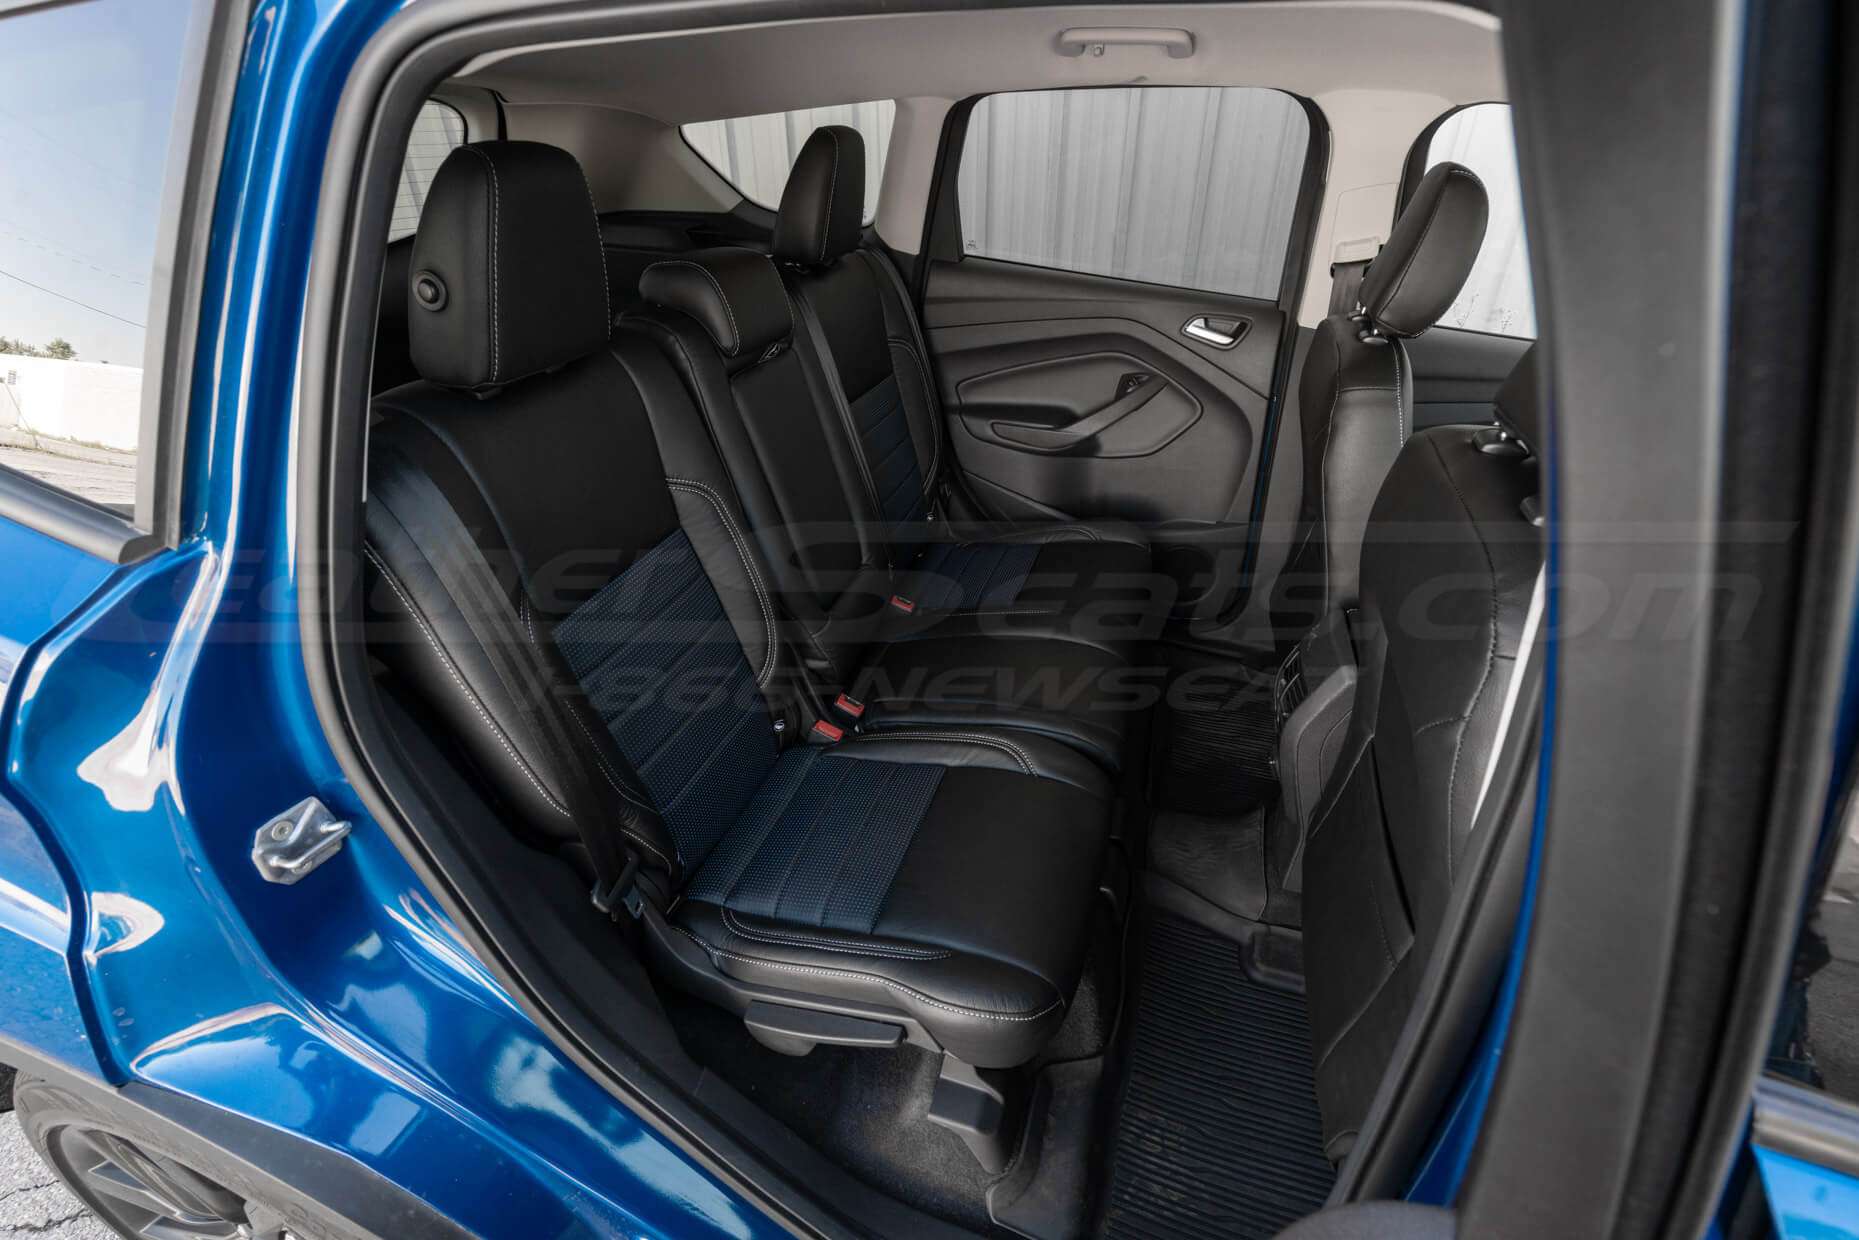 2017-2019 Ford Escape with Black and Piazza Blue Perforated leather seats - Rear seats from passenger side